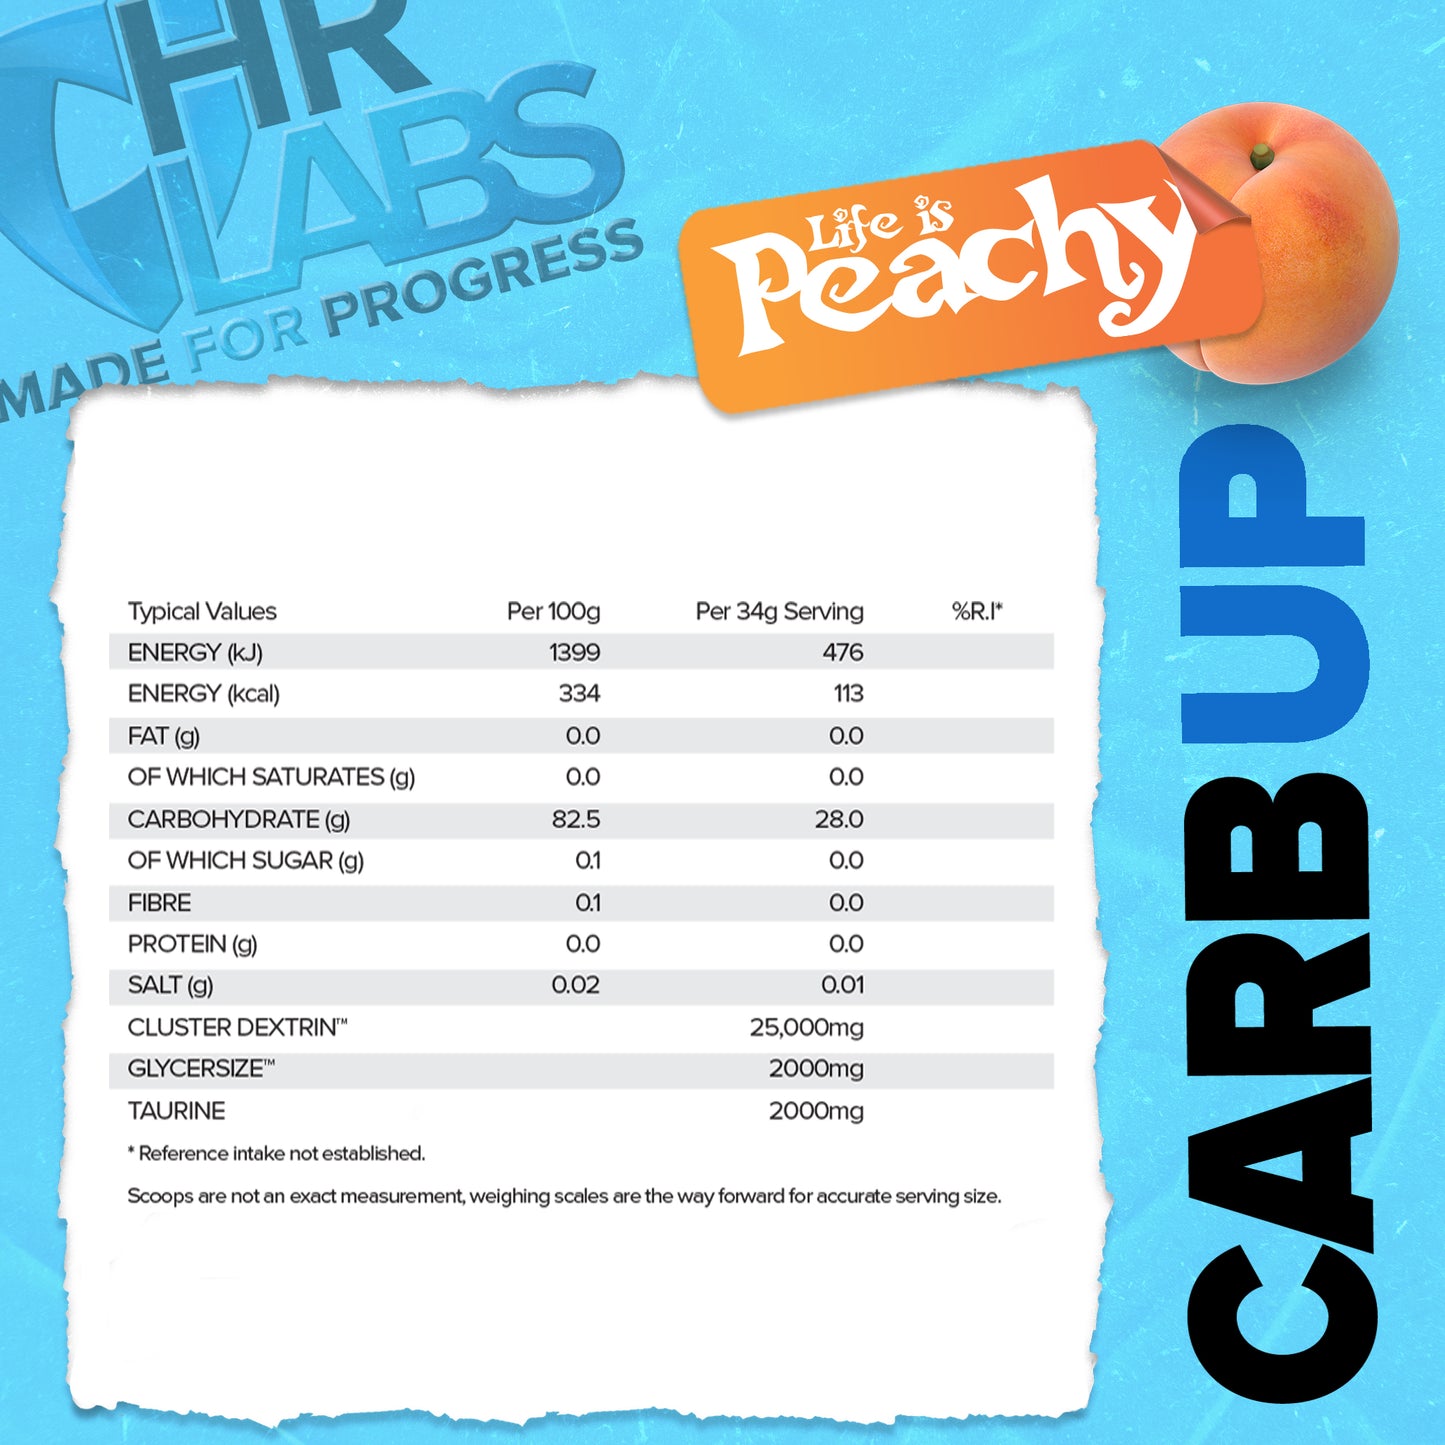 CARB UP LIFE IS PEACHY